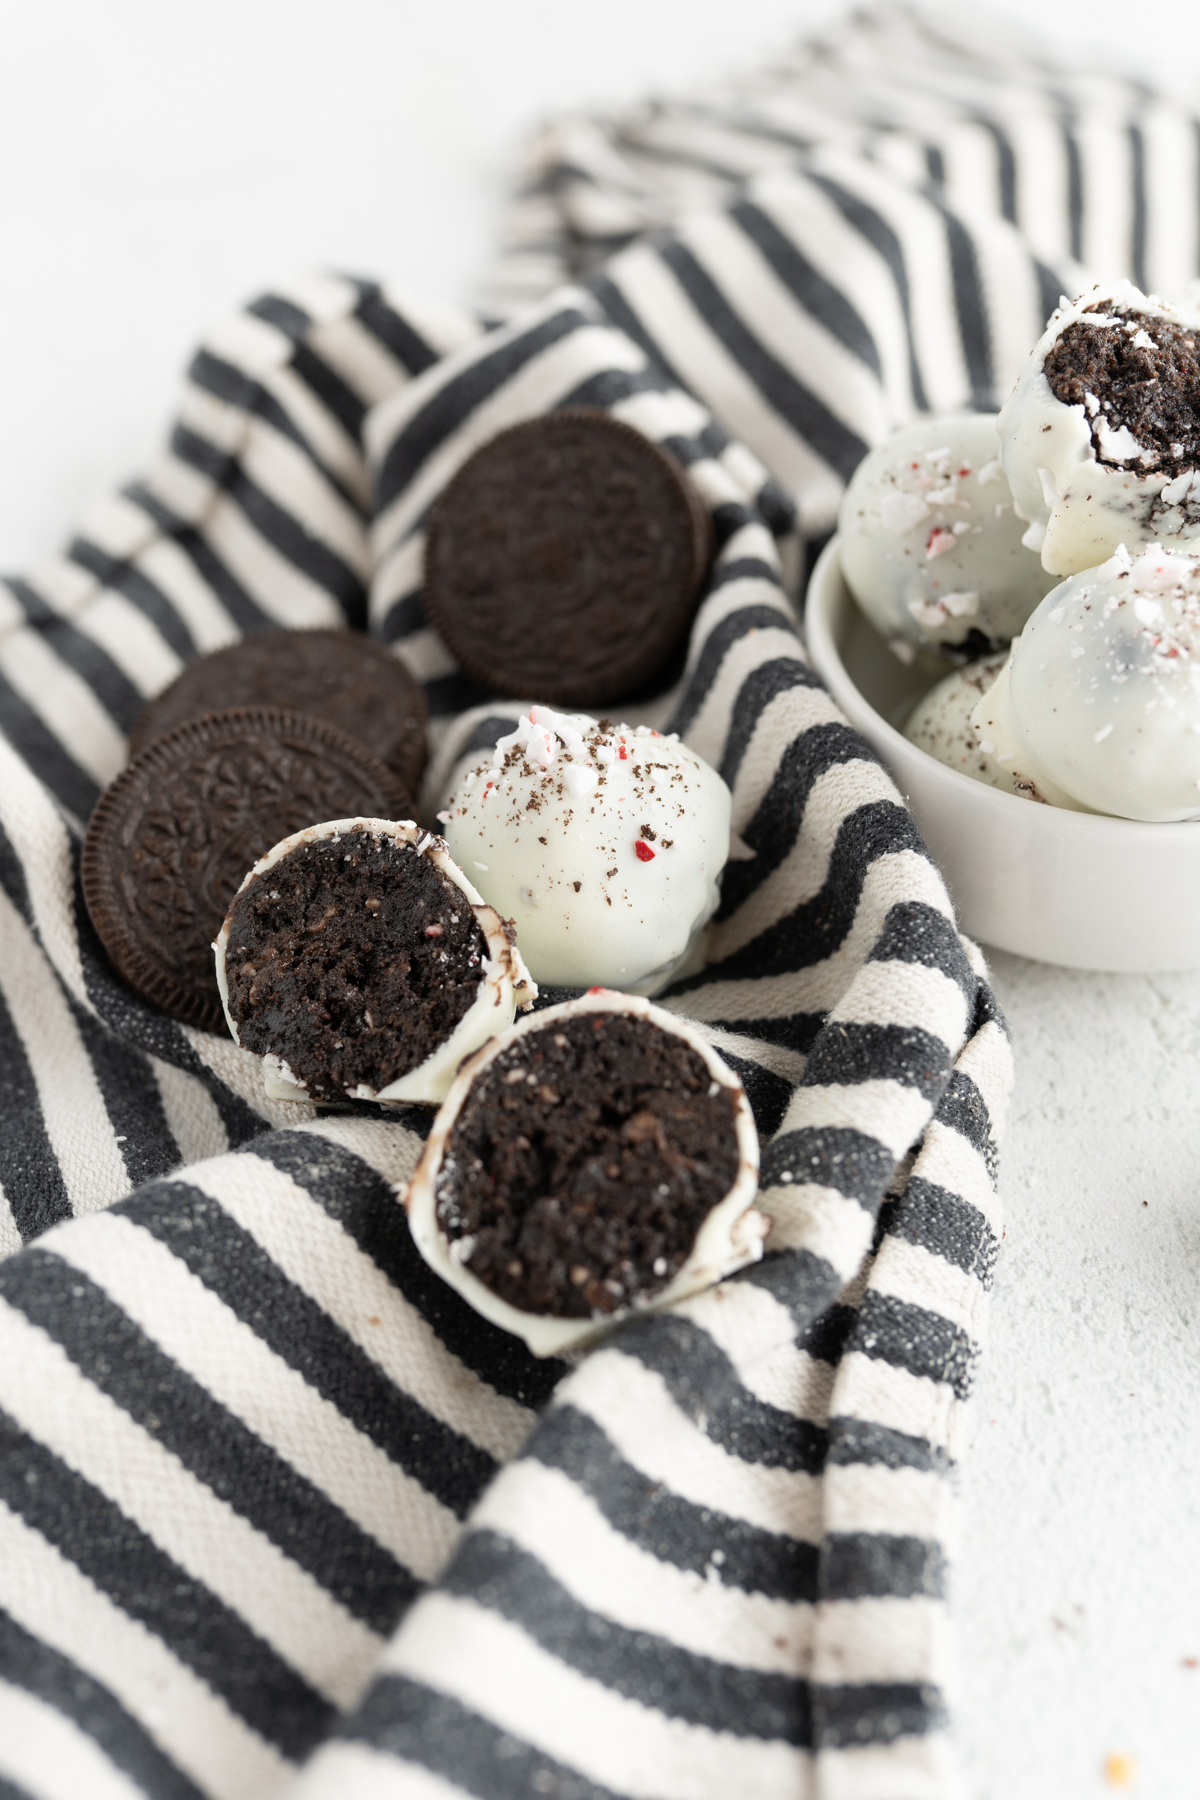 Peppermint oreo balls on a striped towel on the counter. One truffle is split in half. 